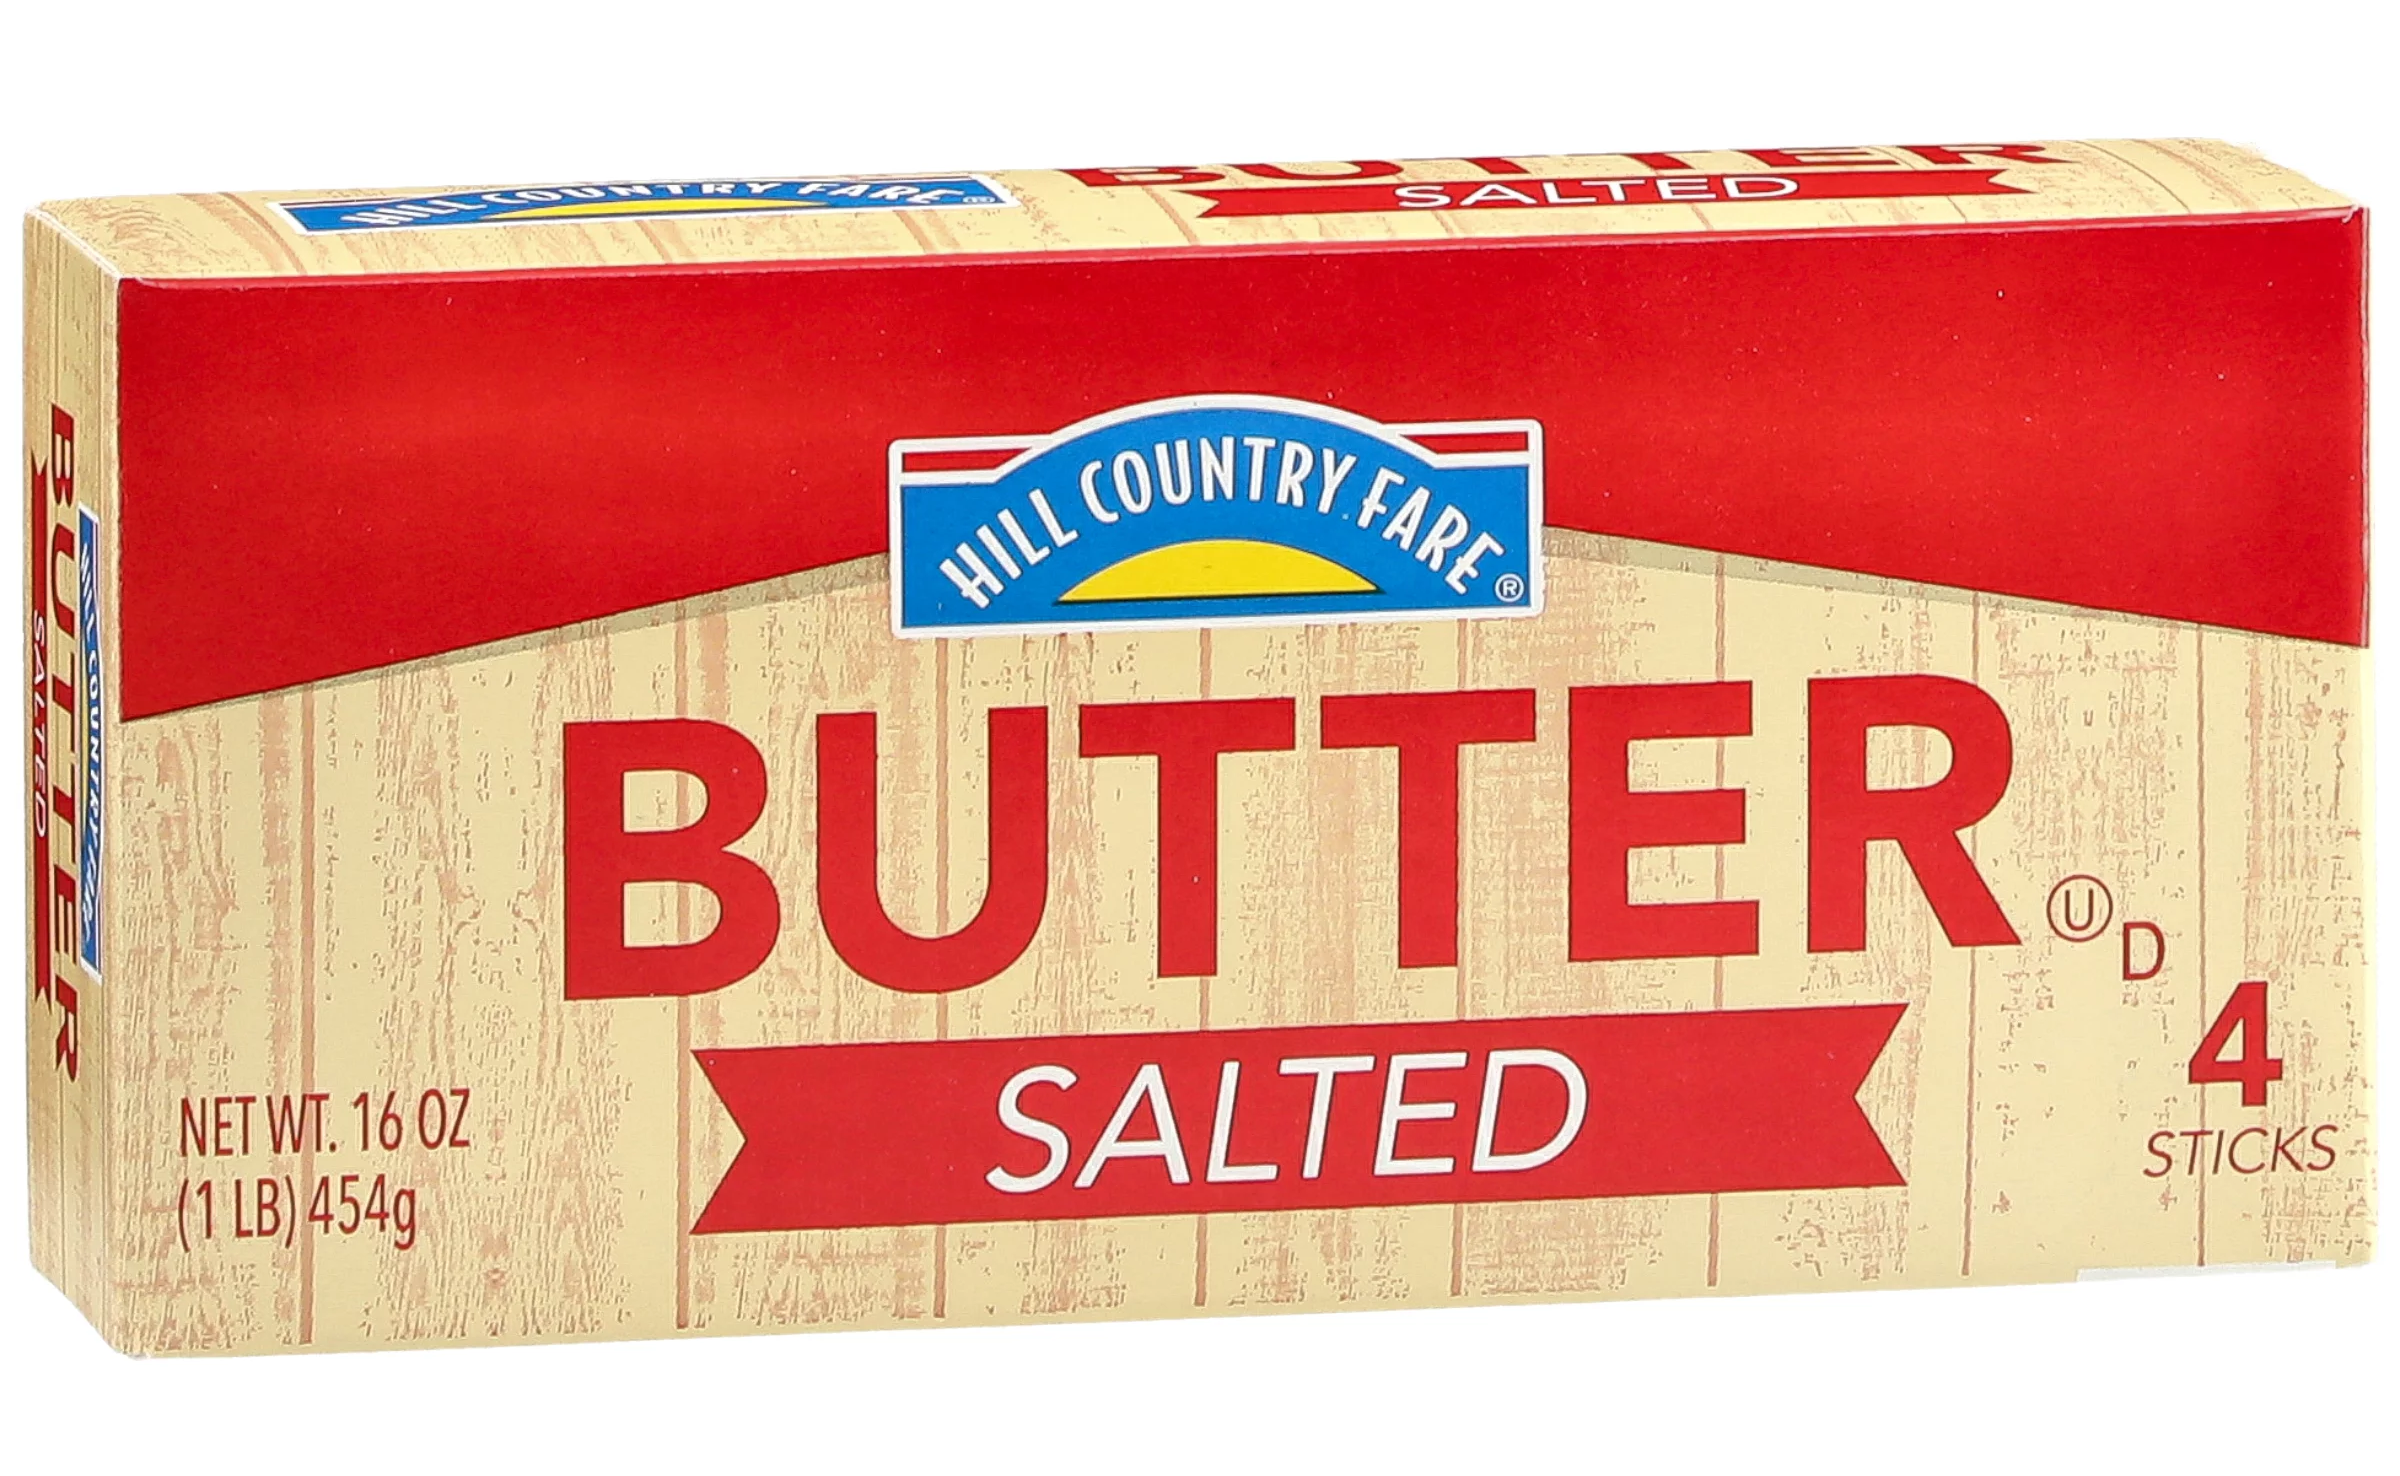 salted butter